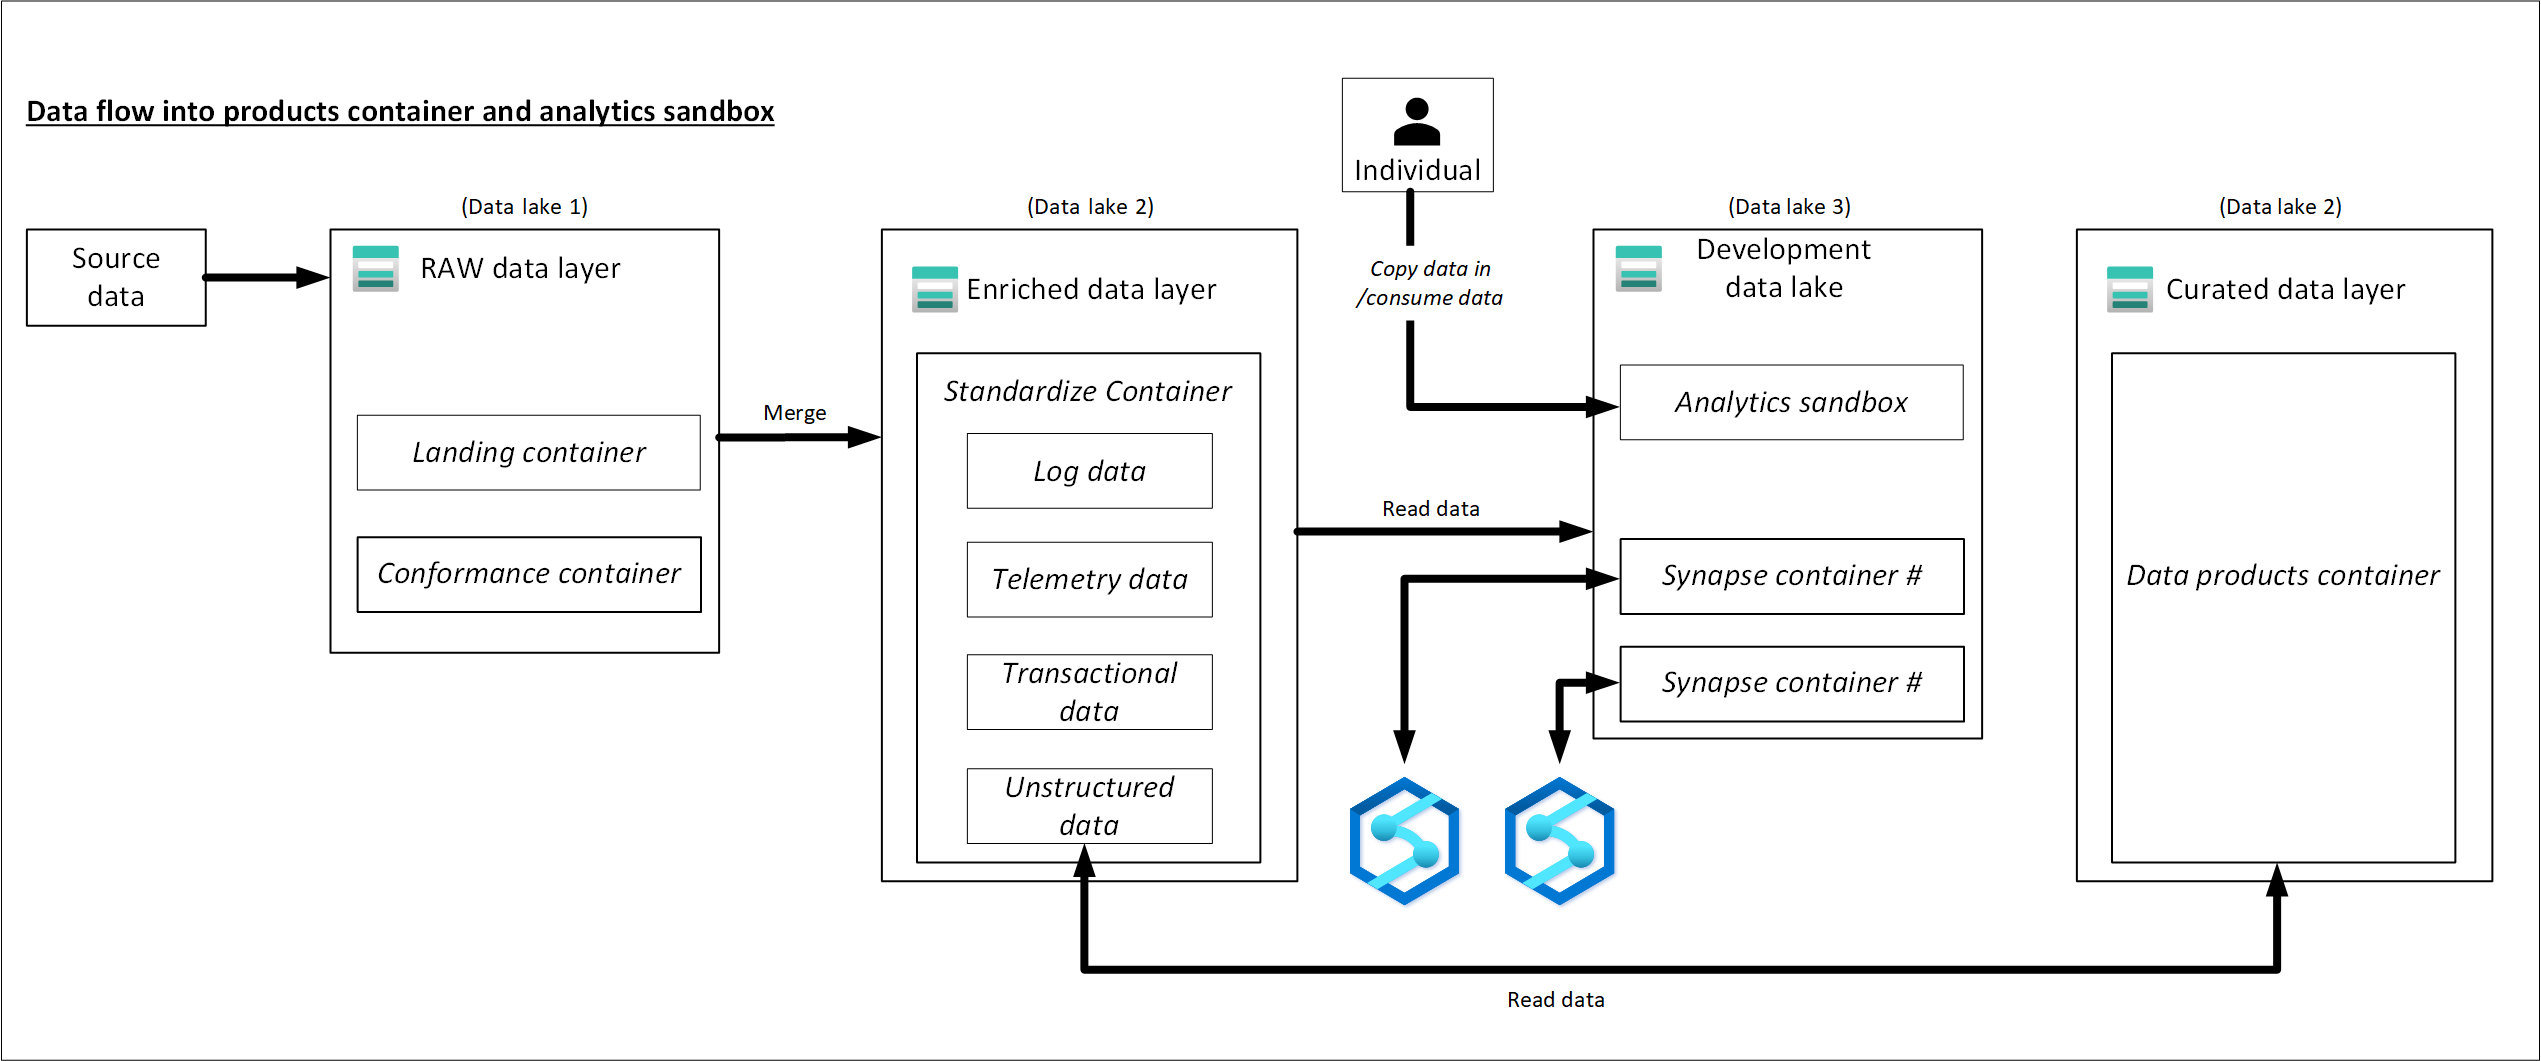 Data flow into product container and analytics sandbox